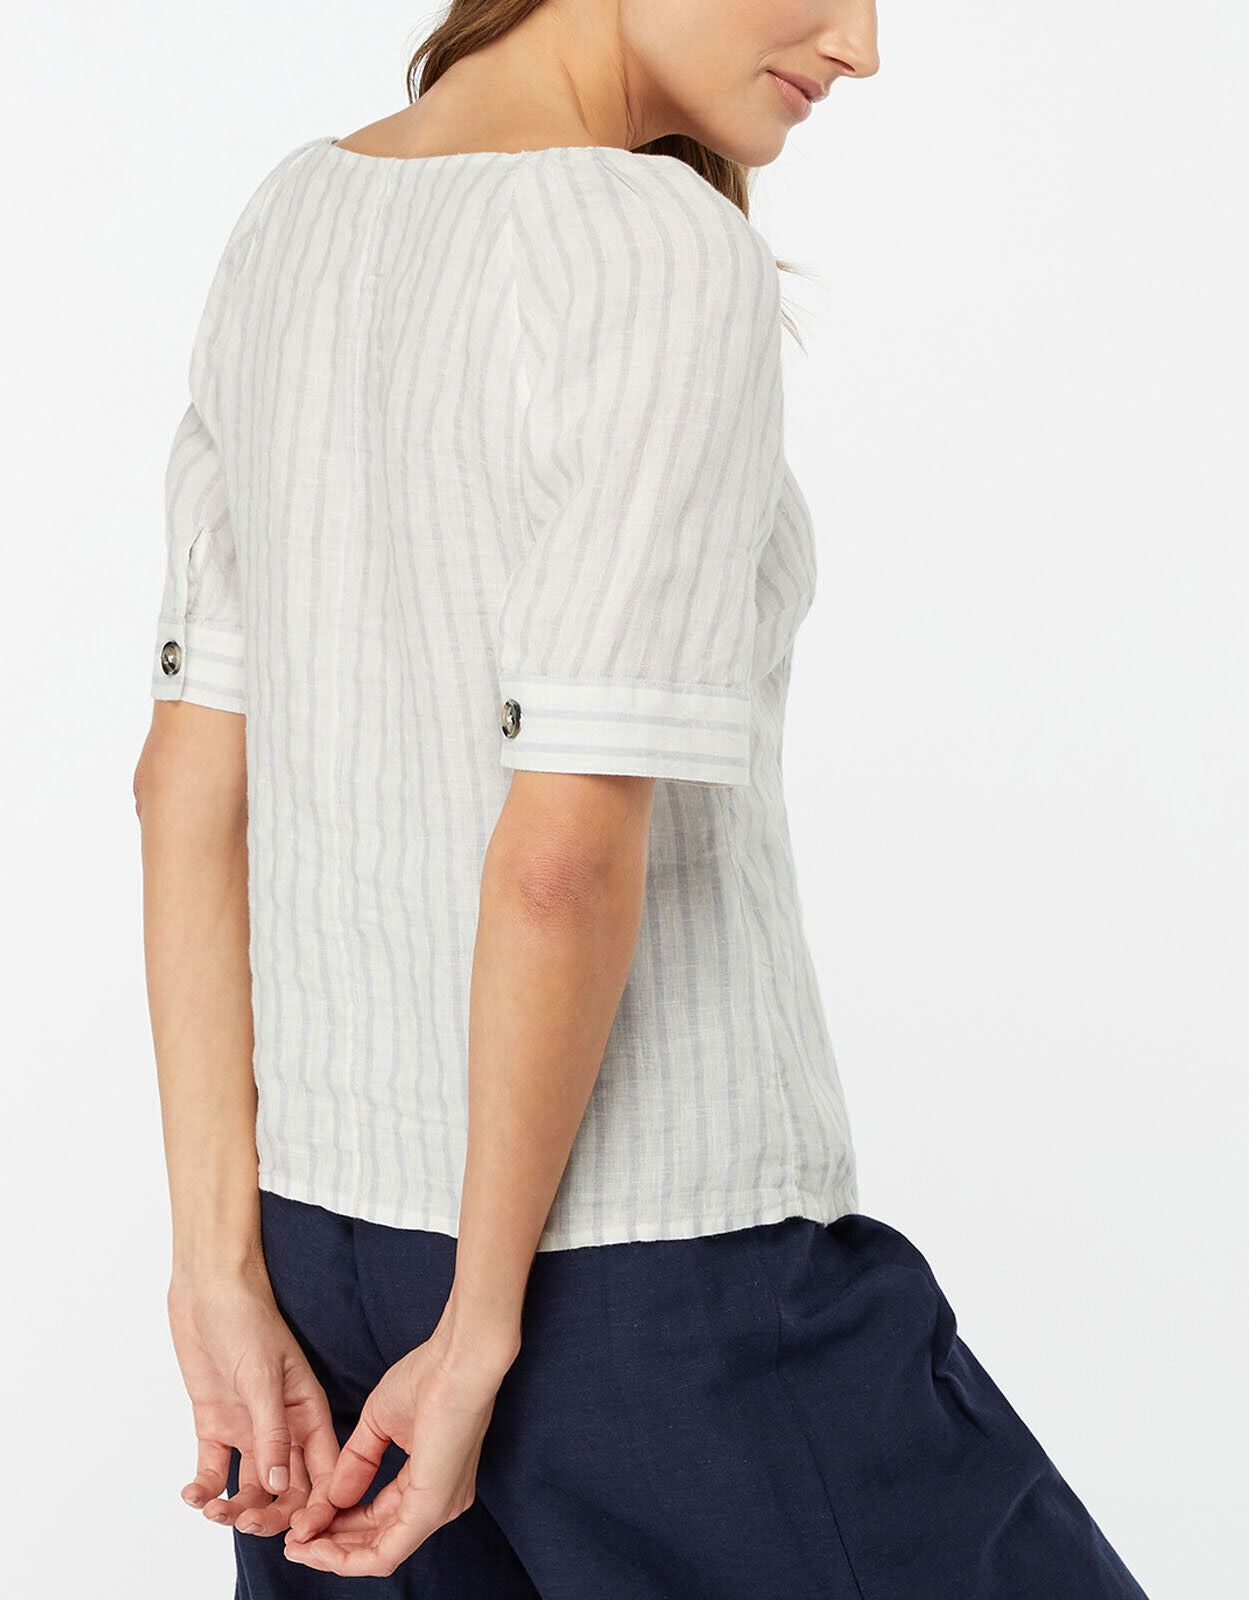 EX Monsoon Ivory Fifi Stripe Linen Top in Sizes 14 or 20 RRP £39